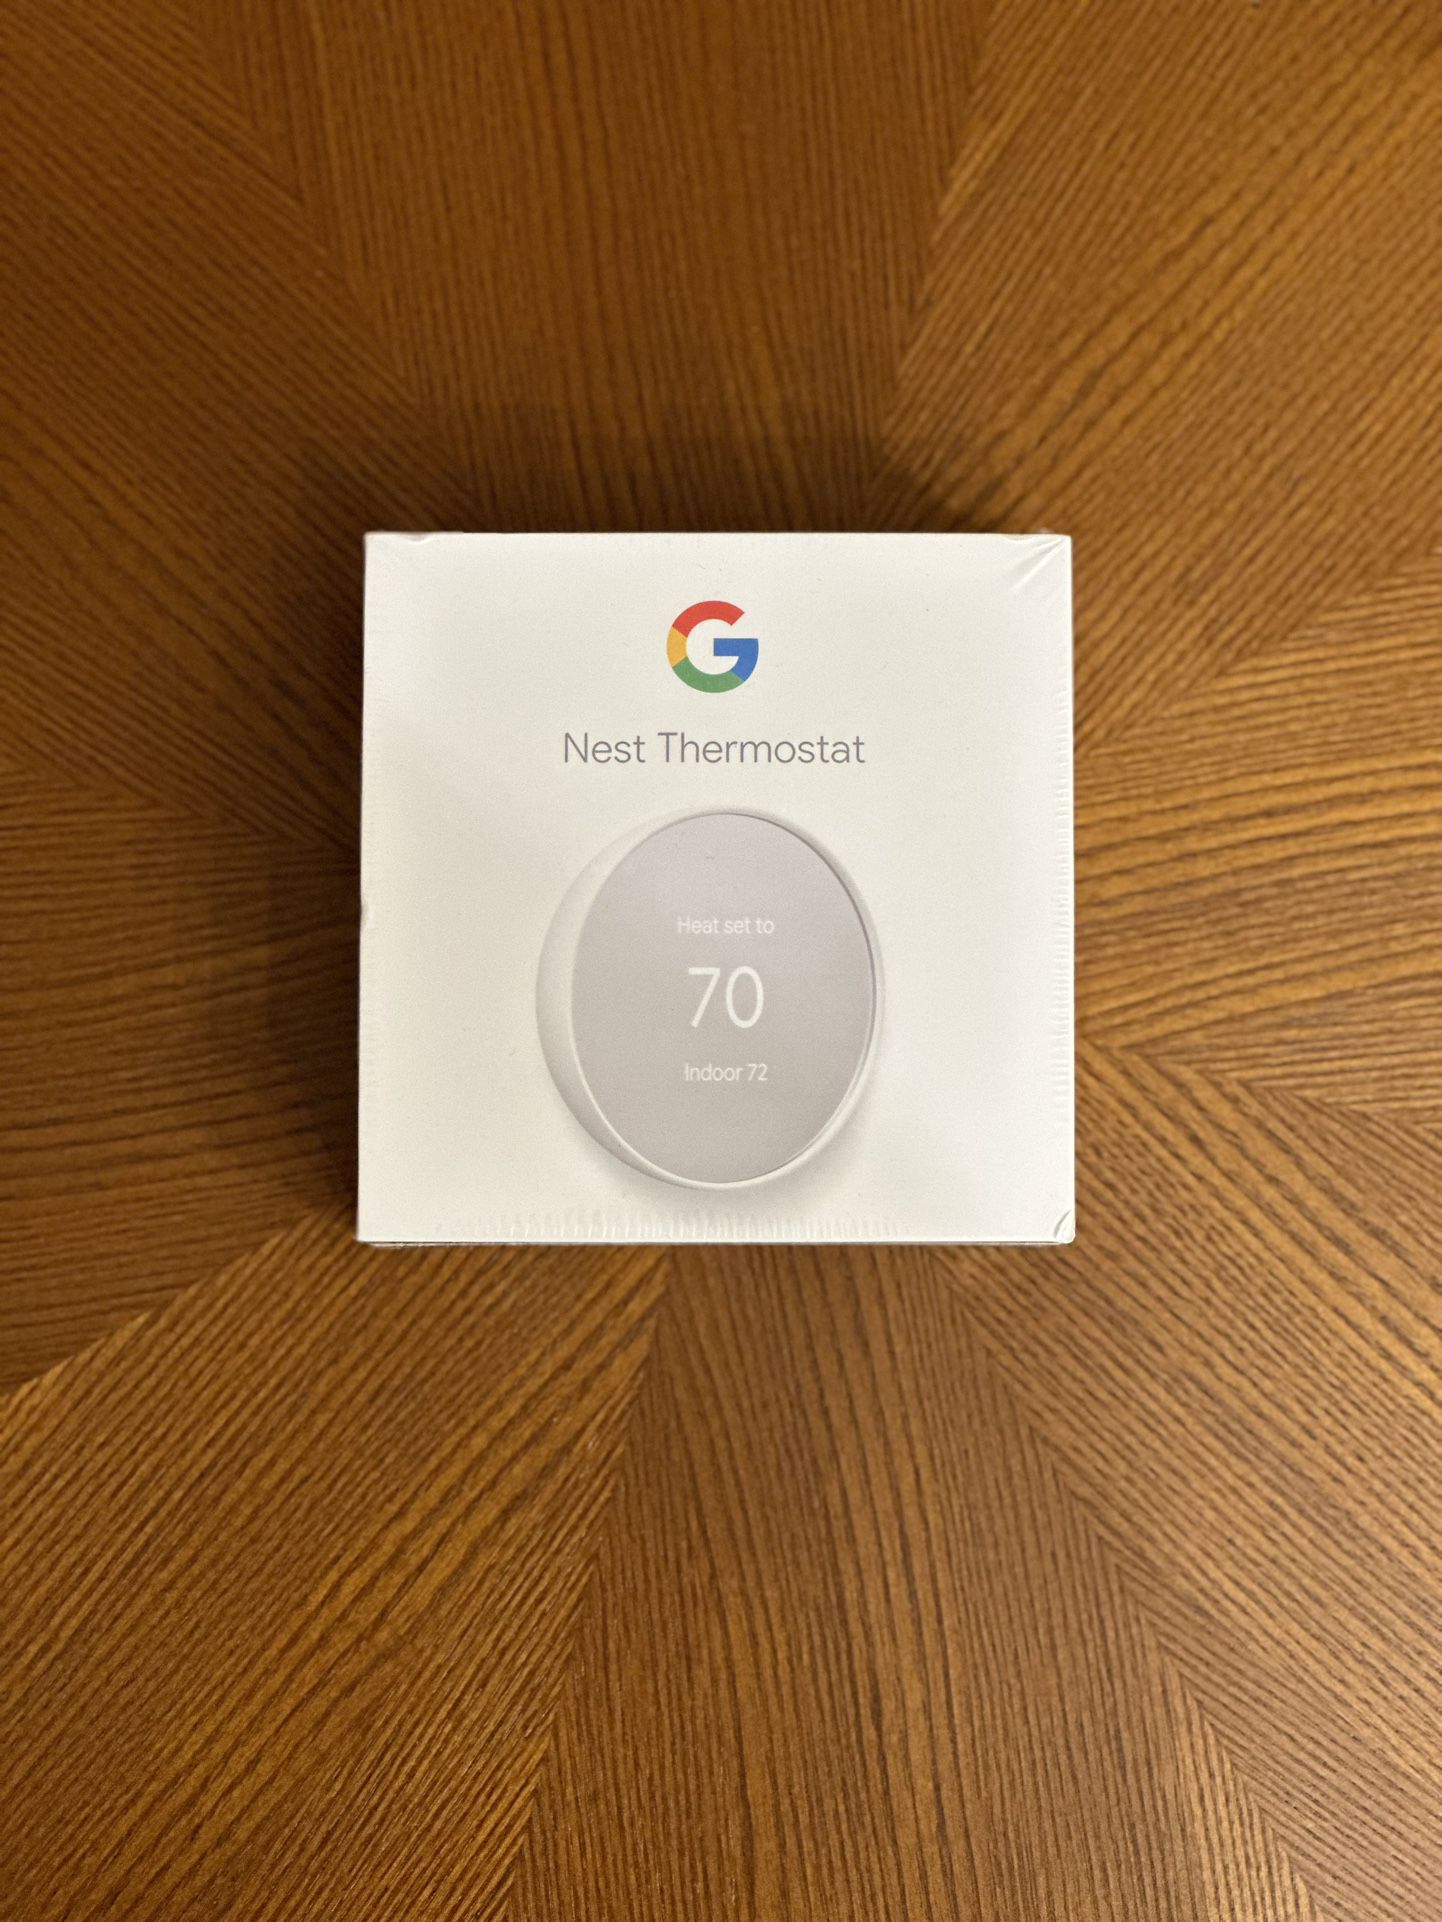 Google Nest Thermostat - NEVER USED